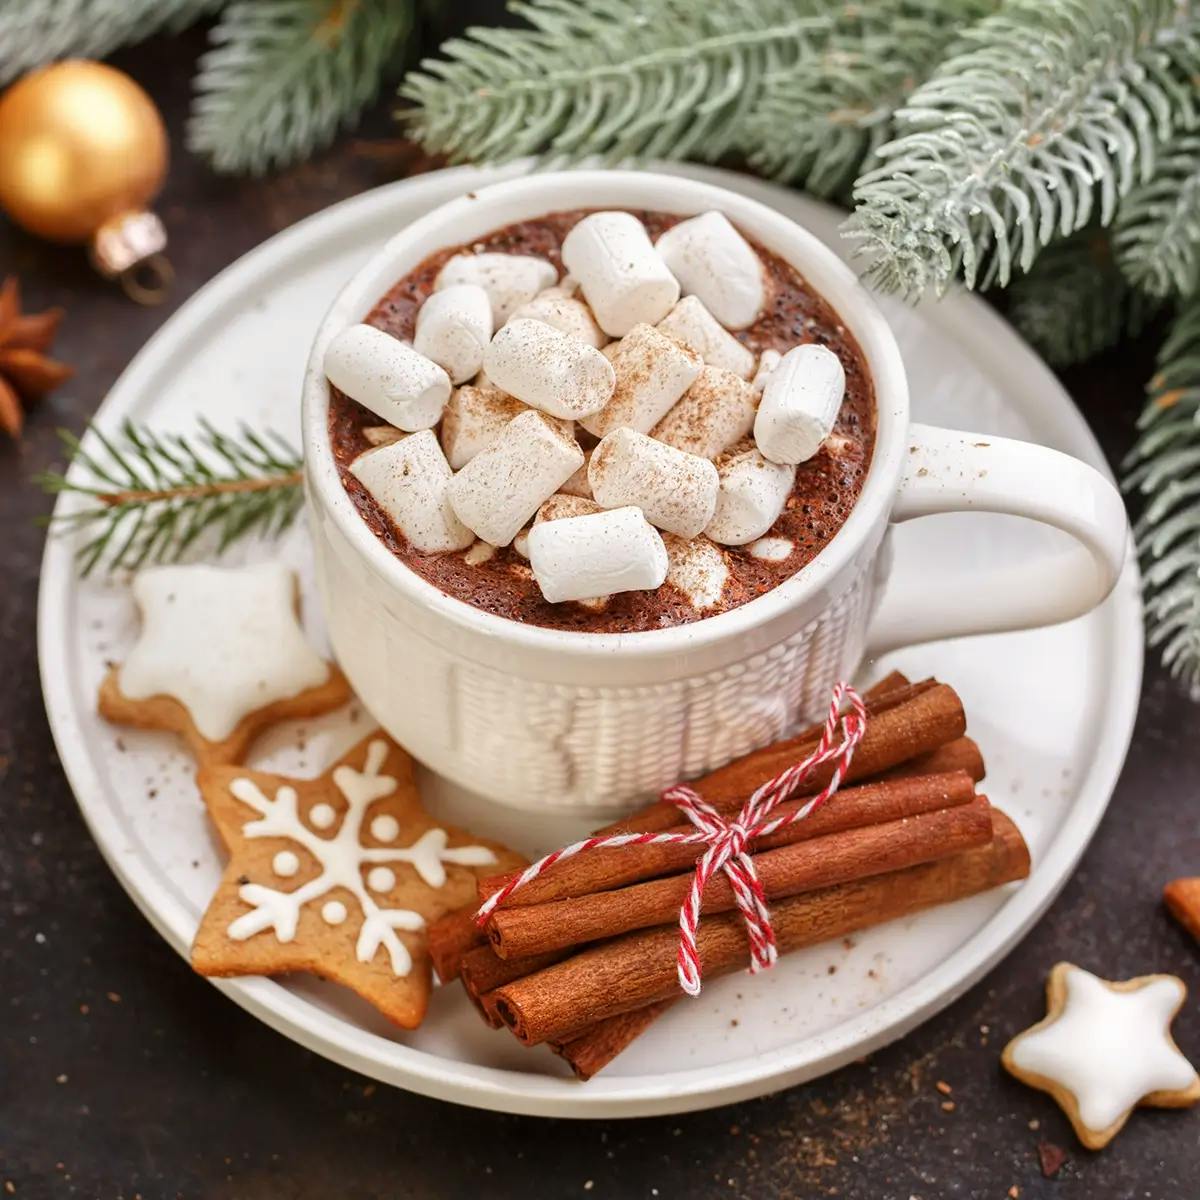 Cup of crockpot hot chocolate topped with marshmallows and cinnamon, with a bundle of cinnamon sticks and star cookies on the saucer. Pine branches, Christmas ornaments and star anise in the background.